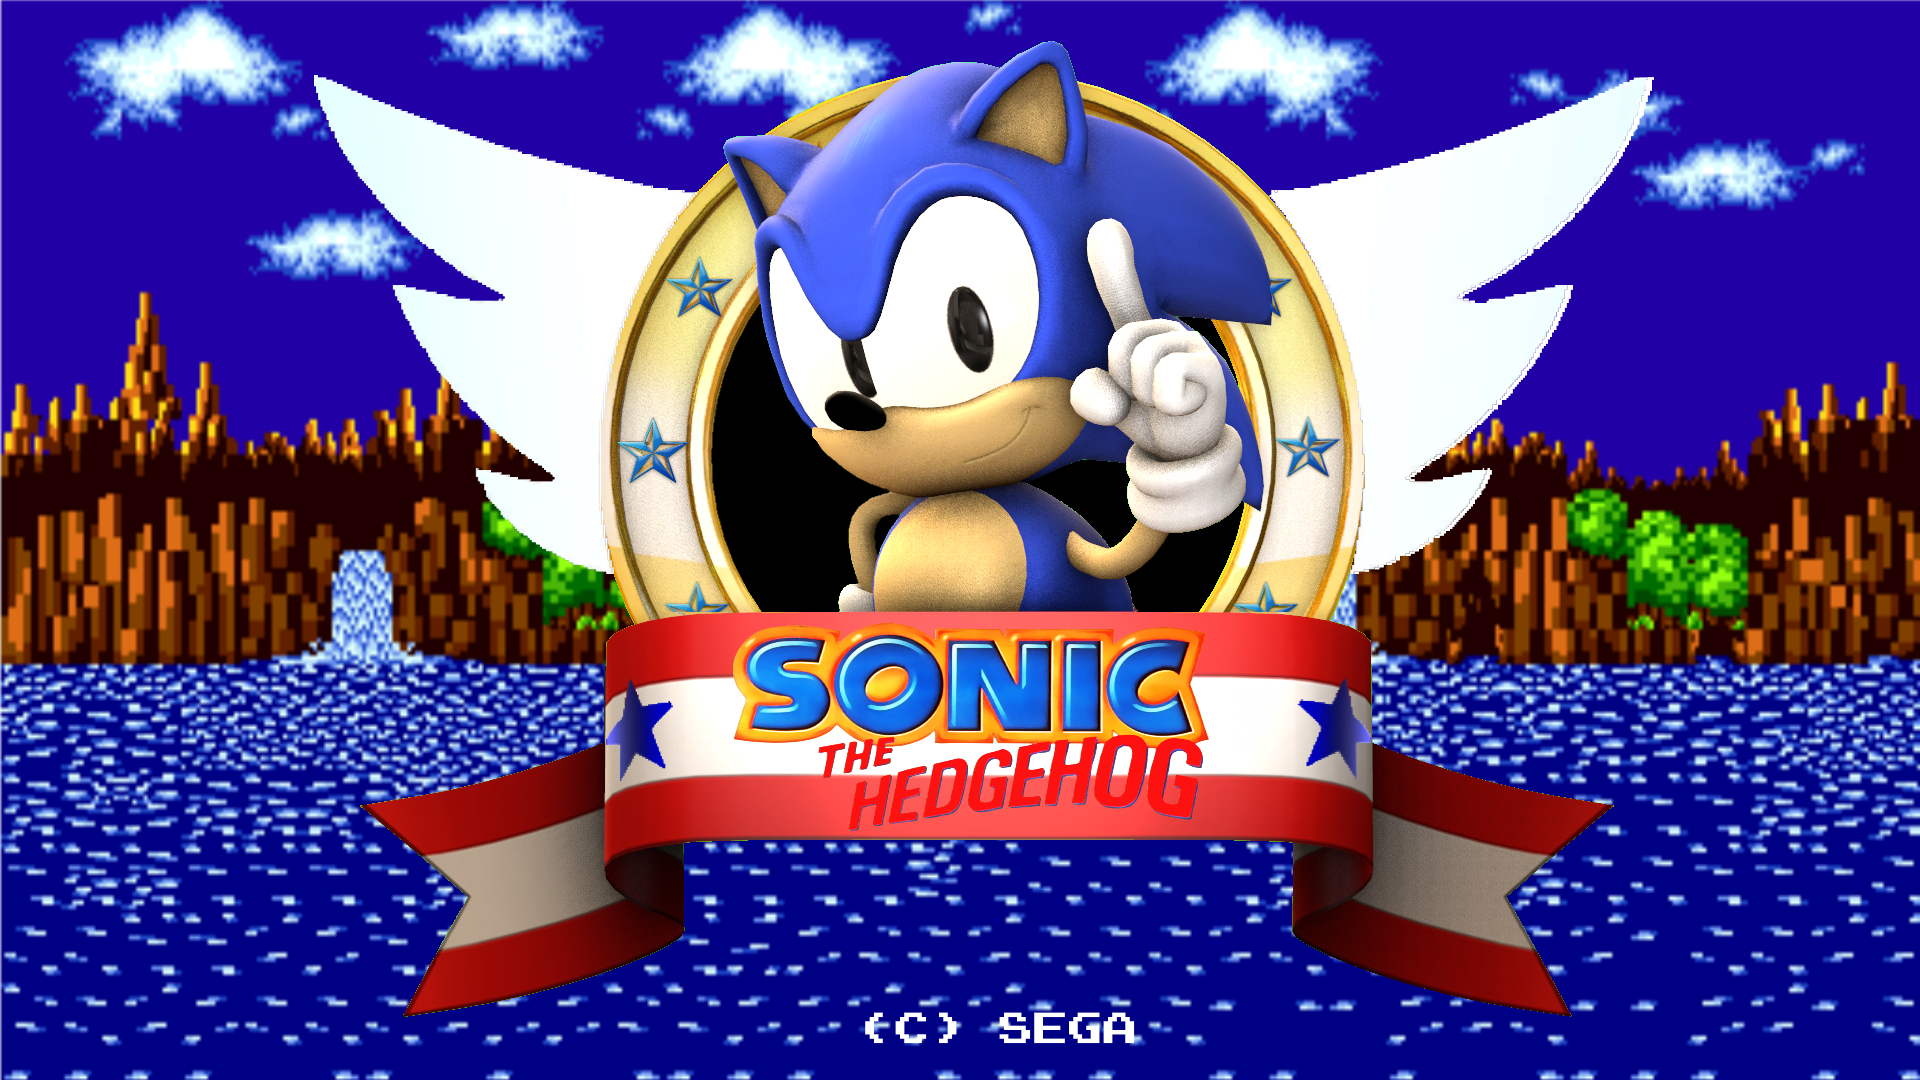 sonic the hedgehog title screen but sonic is replaced